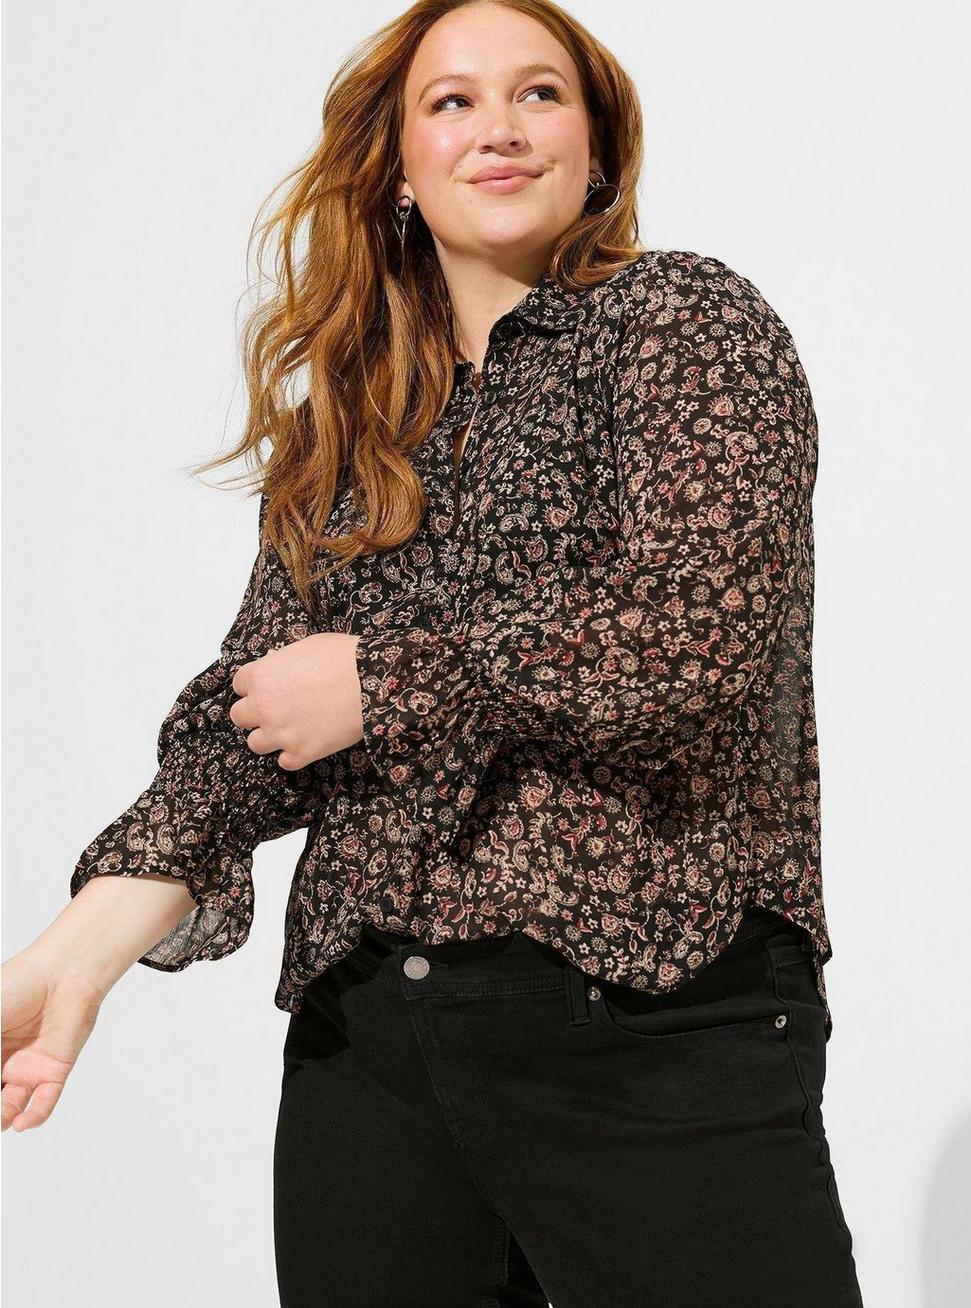 Festi Tissue Weight Chiffon Button Front Puff Sleeve Top, PAISLEY BLACK, hi-res